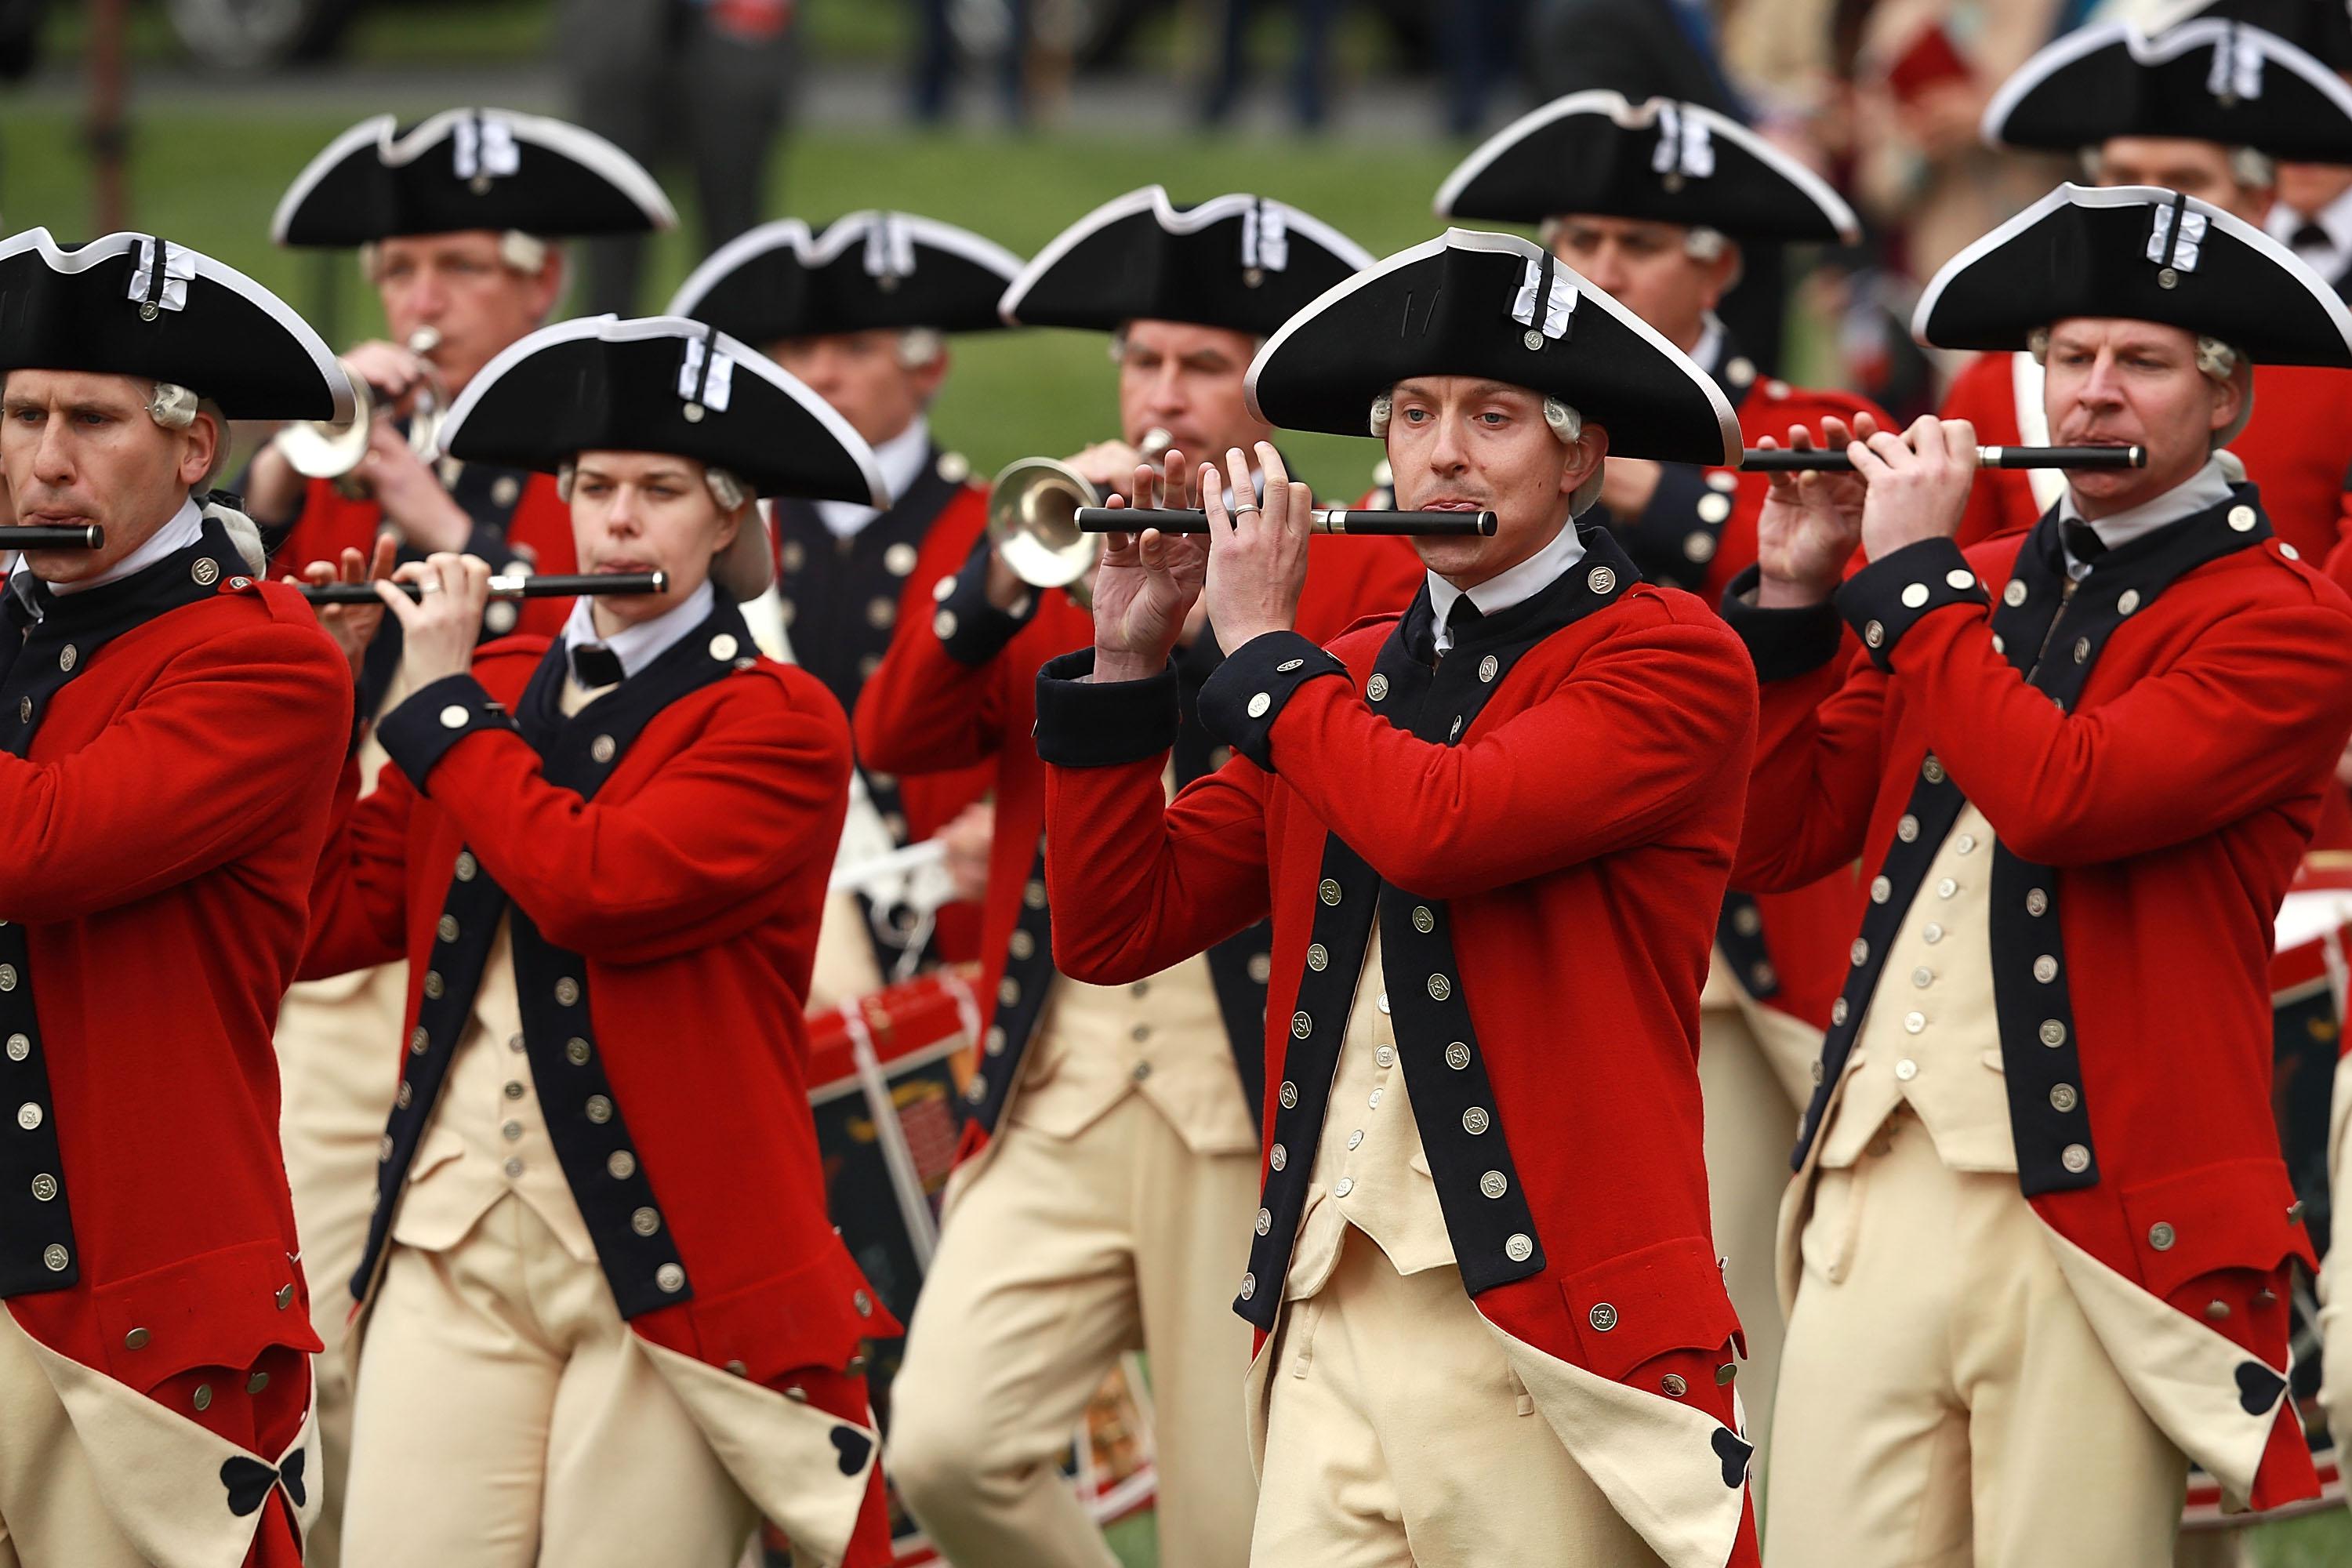 The United States Army Old Guard Fife and Drum Corps perform during the official arrival ceremony for French President Emmanuel Macron on the South Lawn of the White House April 24, 2018 in Washington, DC. Macron is in Washington for a three-day official visit that included dinner at George Washington's Mount Venon, a joint news conference with Trump and he will address a joint meeting of Congress Wednesday. 